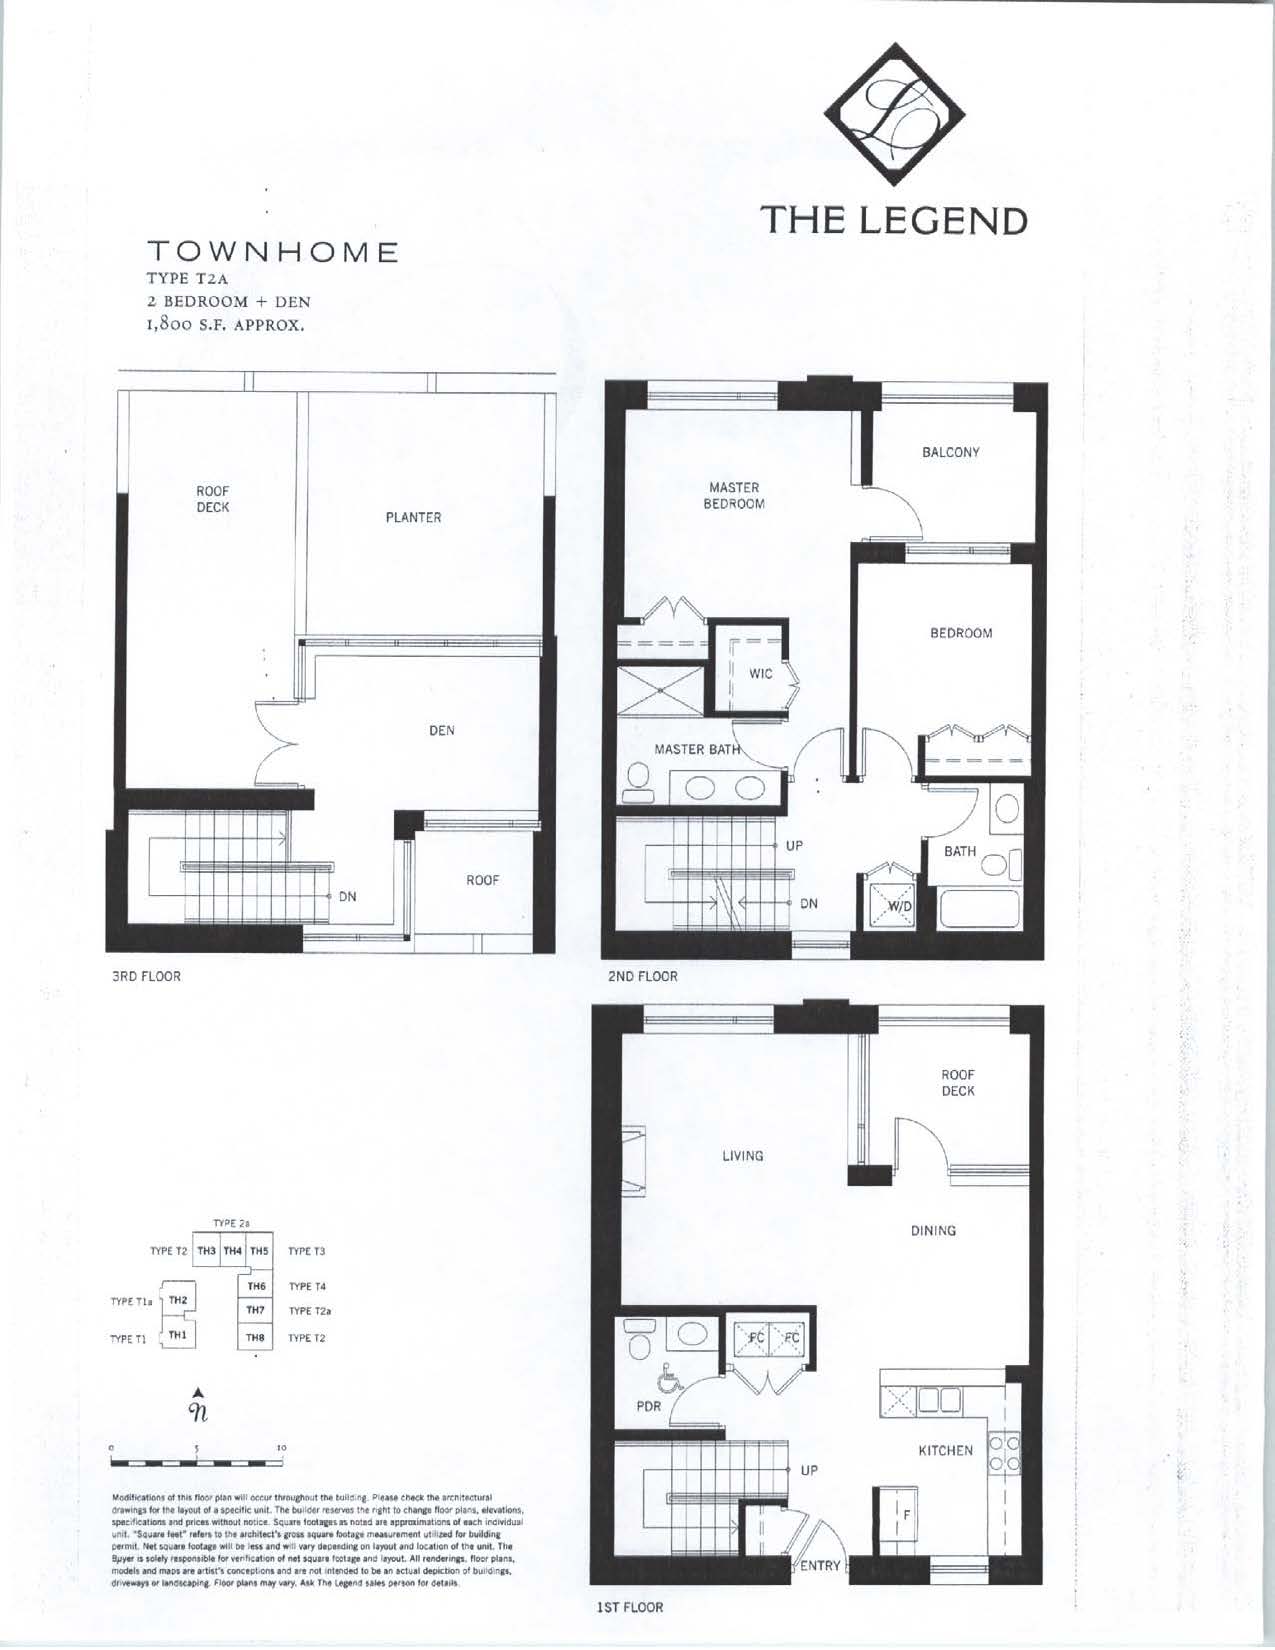 The Legend Townhome